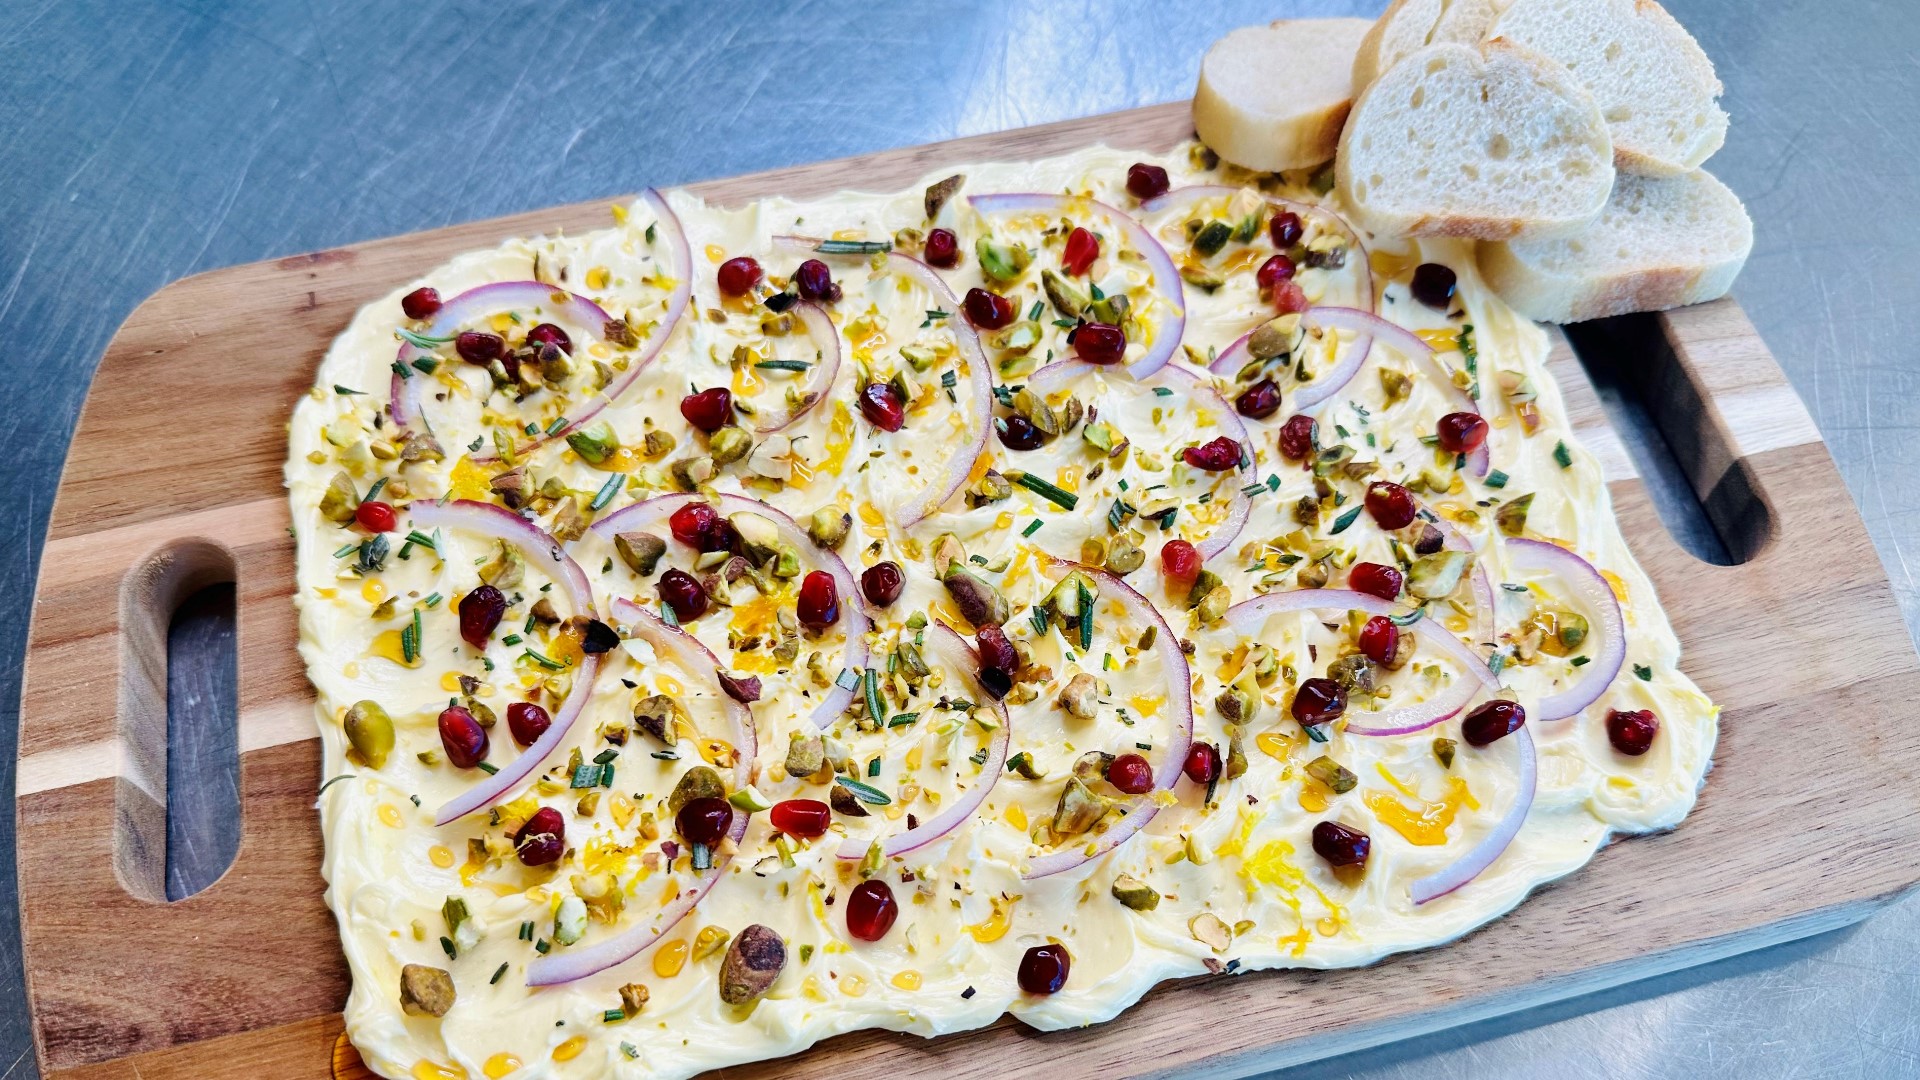 10TV's Brittany Bailey shows you how to make the latest viral trend: a butter board. Put all of your favorite toppings on and serve it with bread!